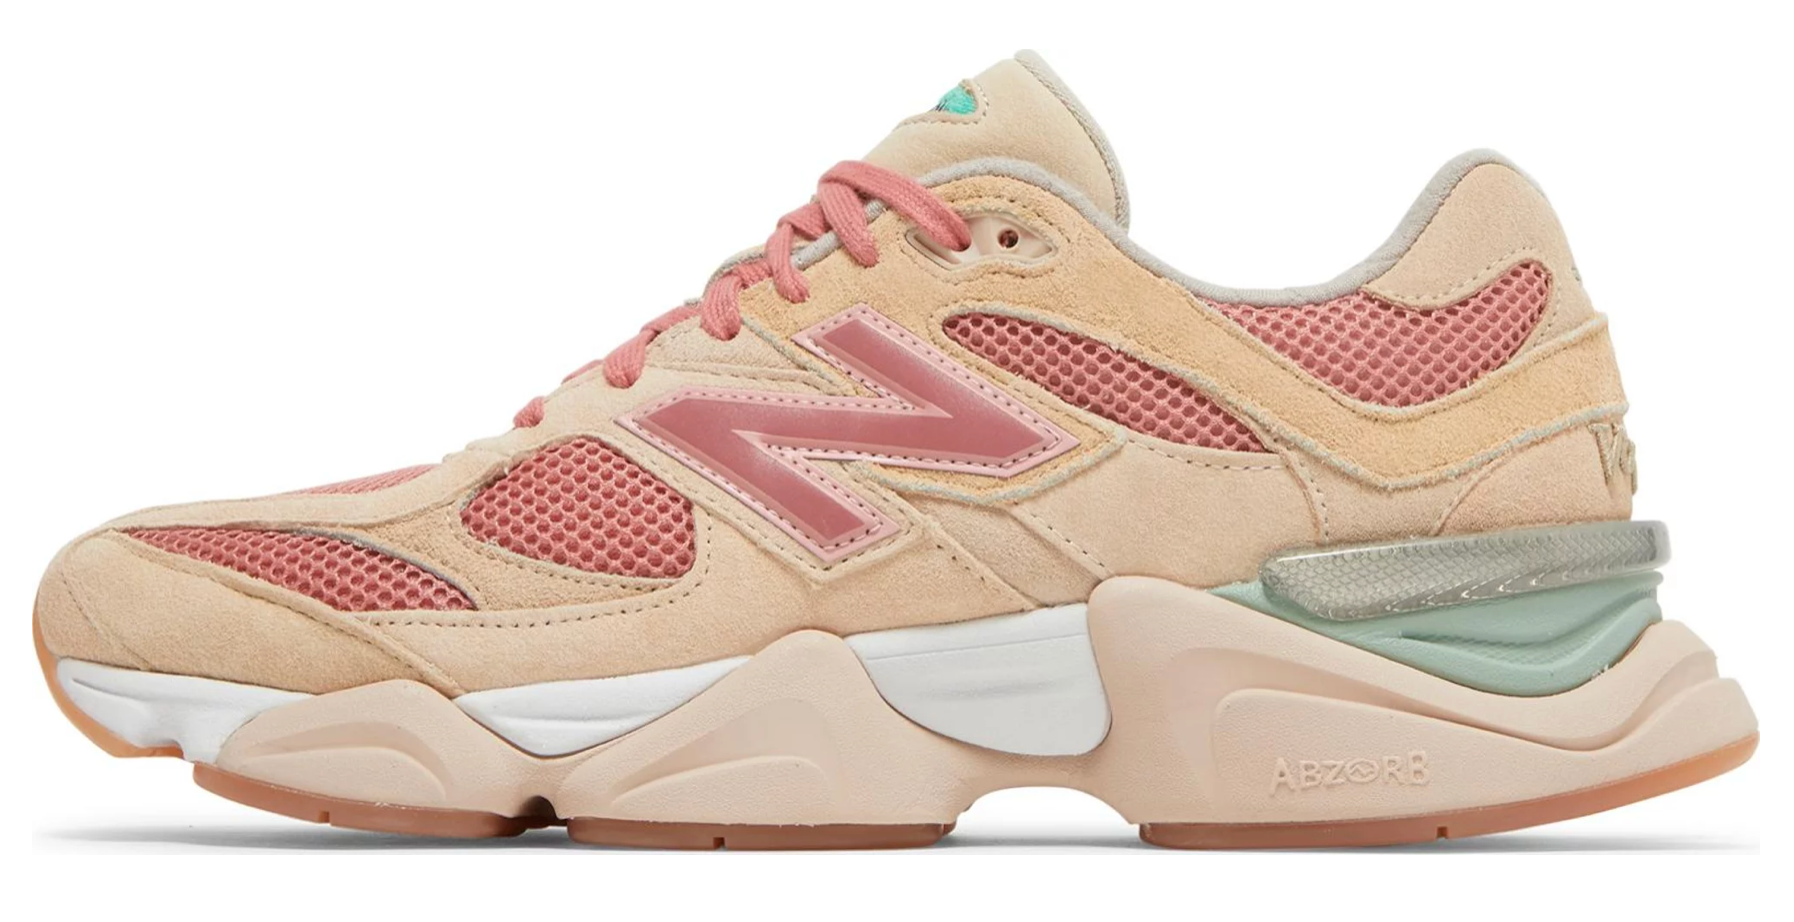 NEW BALANCE 9060 JOE FRESHGOODS INSIDE VOICES PENNY COOKIE PINK